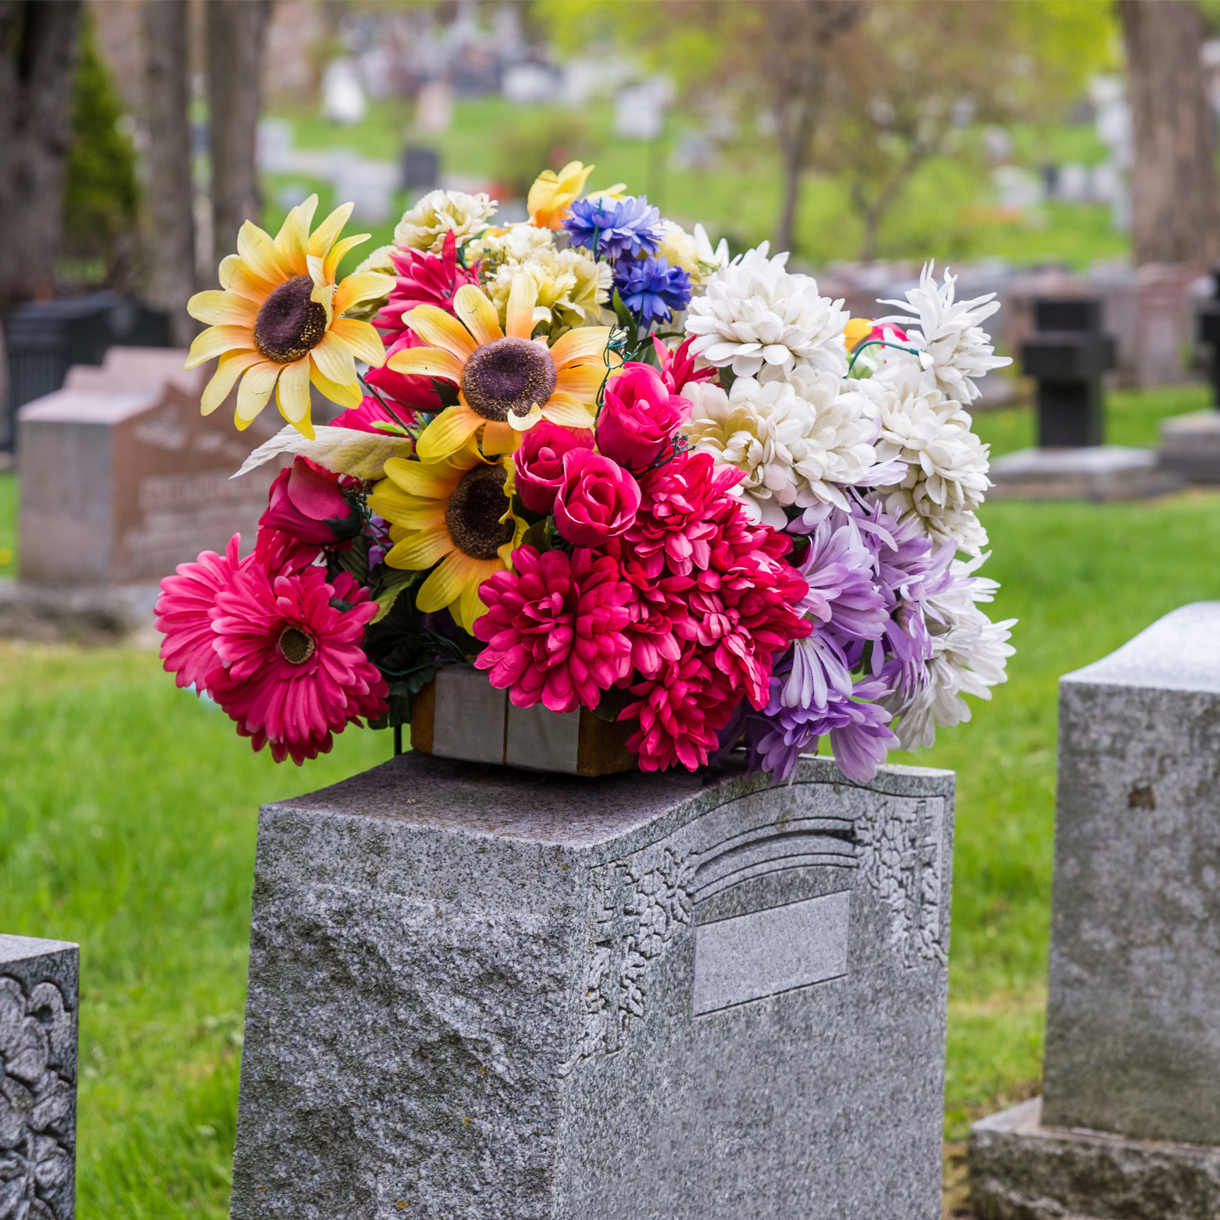 A bouquet of flowers is sitting on top of a grave in a cemetery.